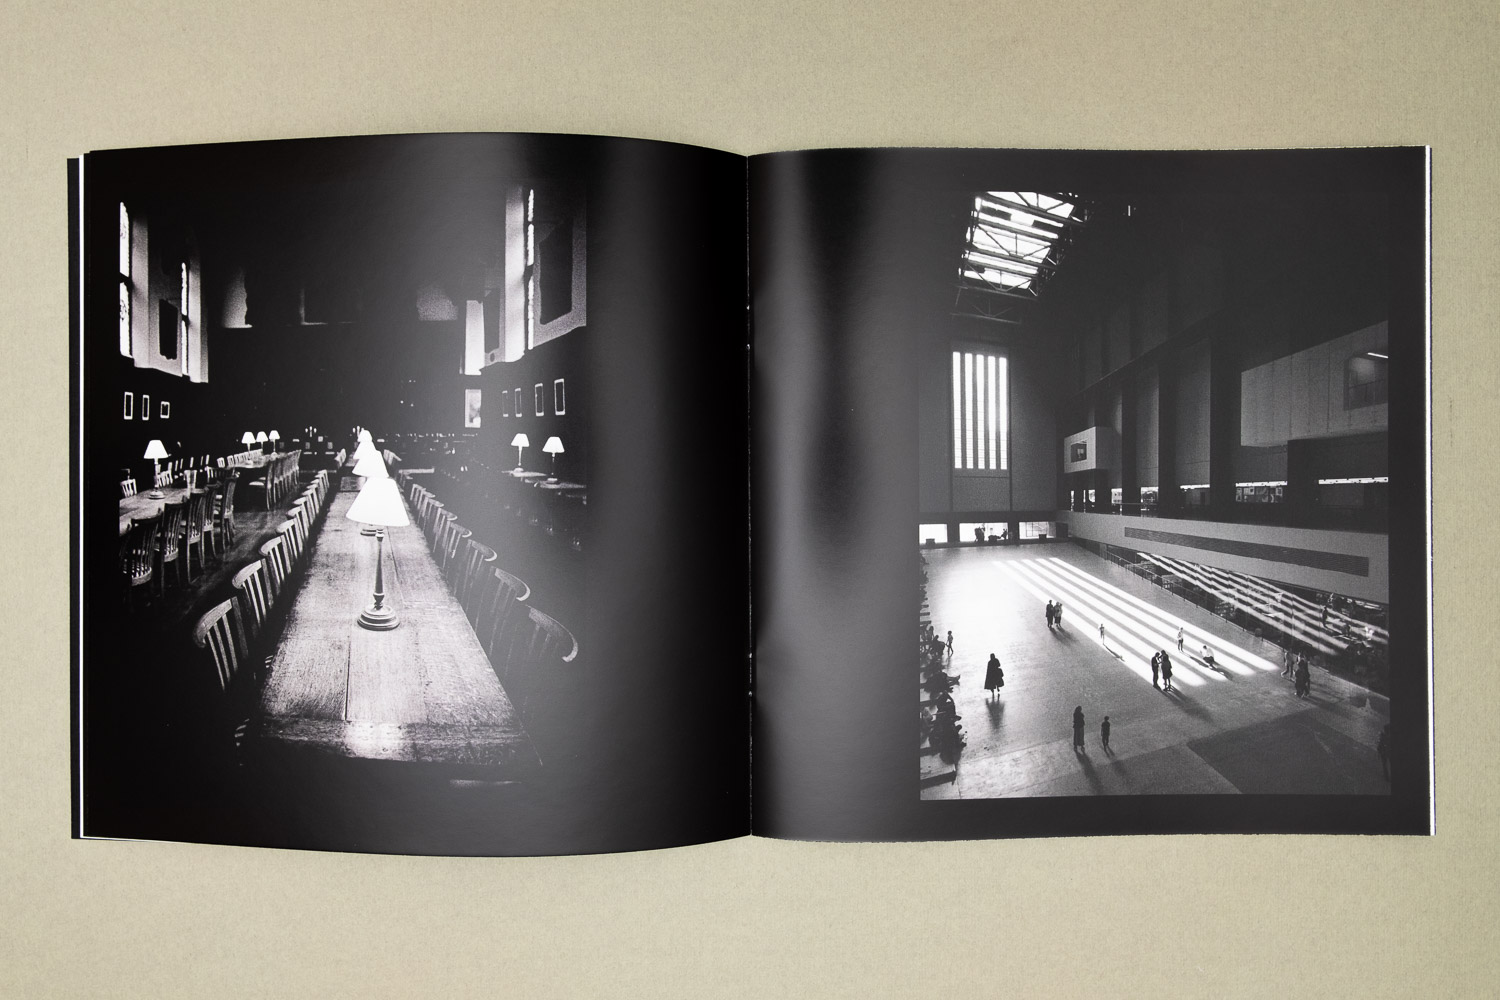 Interior pages of The Lost Show zine, Oxford table and Tate Museum